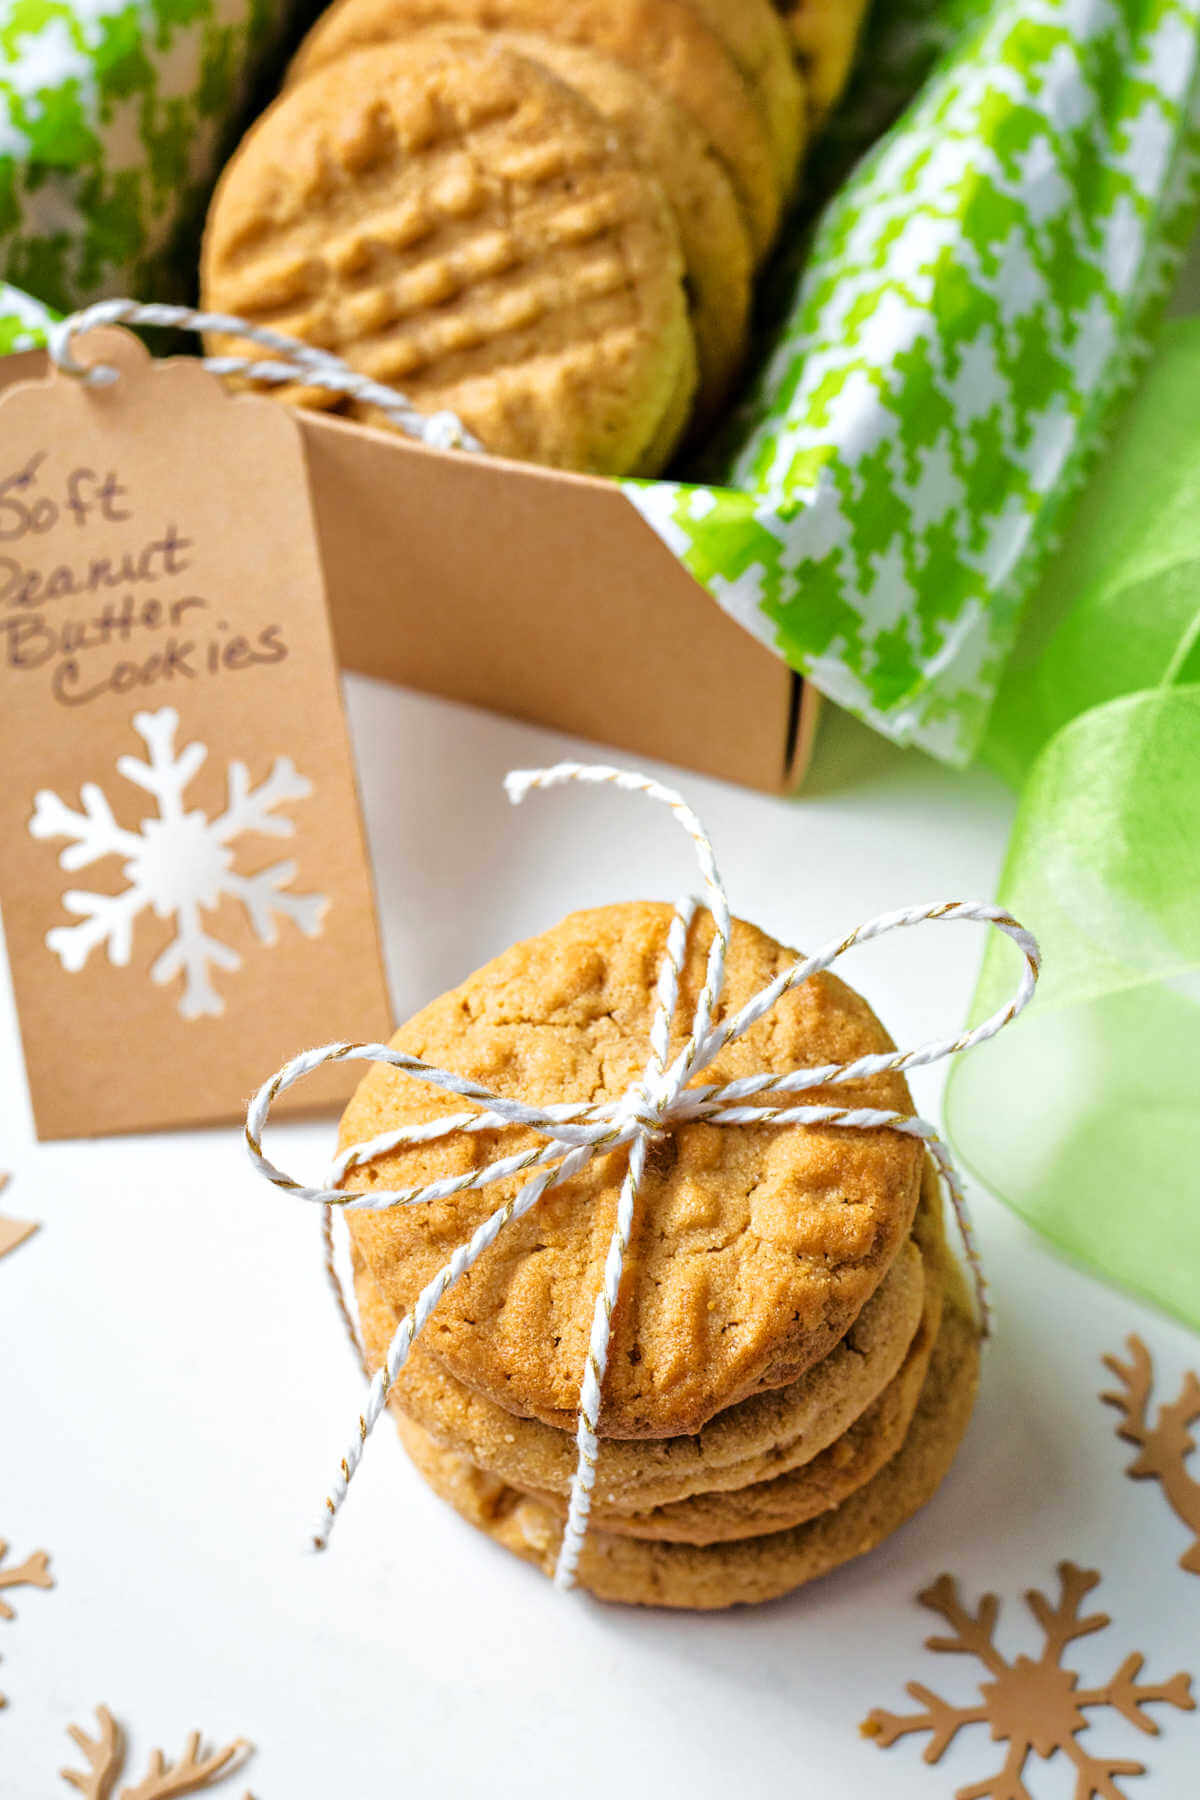 soft peanut cookies tied up with a string sitting on a table with another box of cookies in the background..